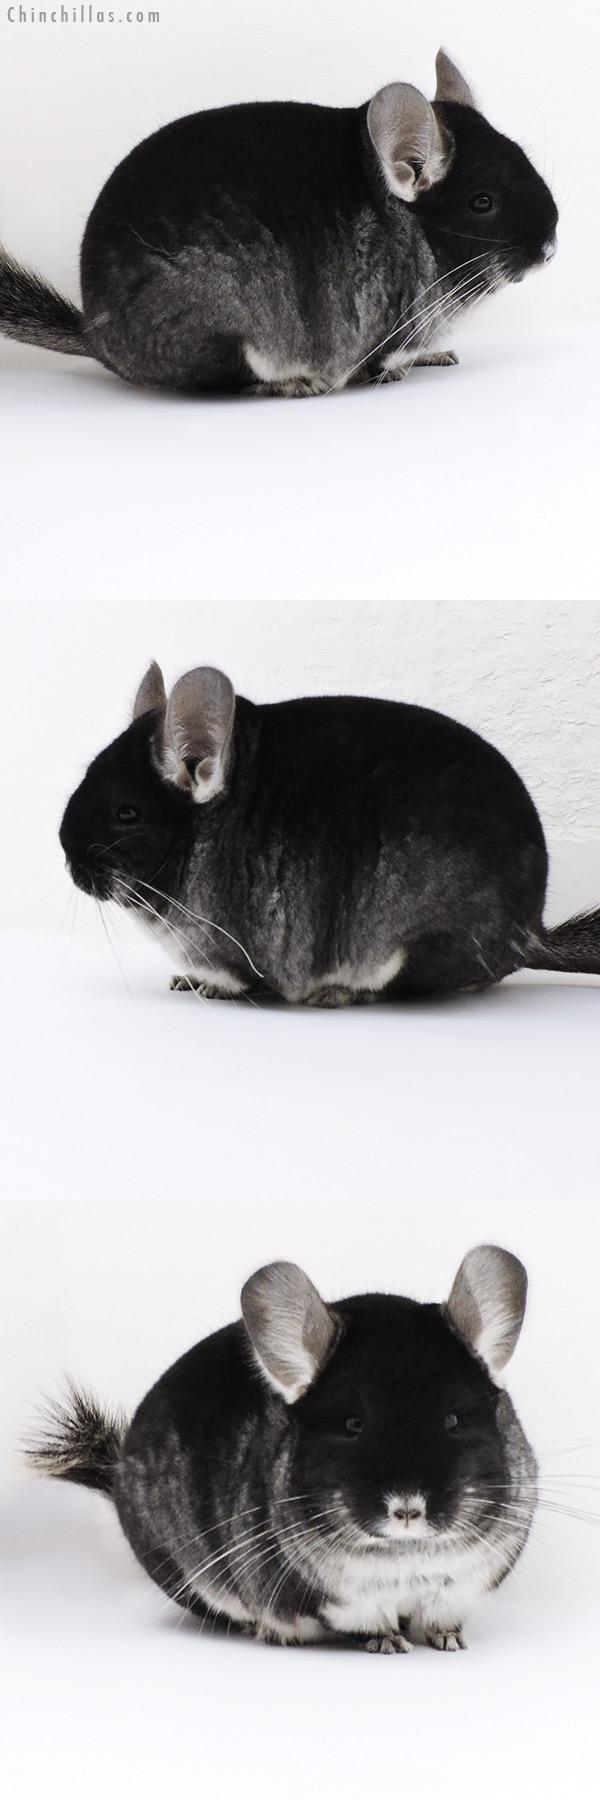 Chinchilla or related item offered for sale or export on Chinchillas.com - 17413 Blocky Show Quality Black Velvet Female Chinchilla